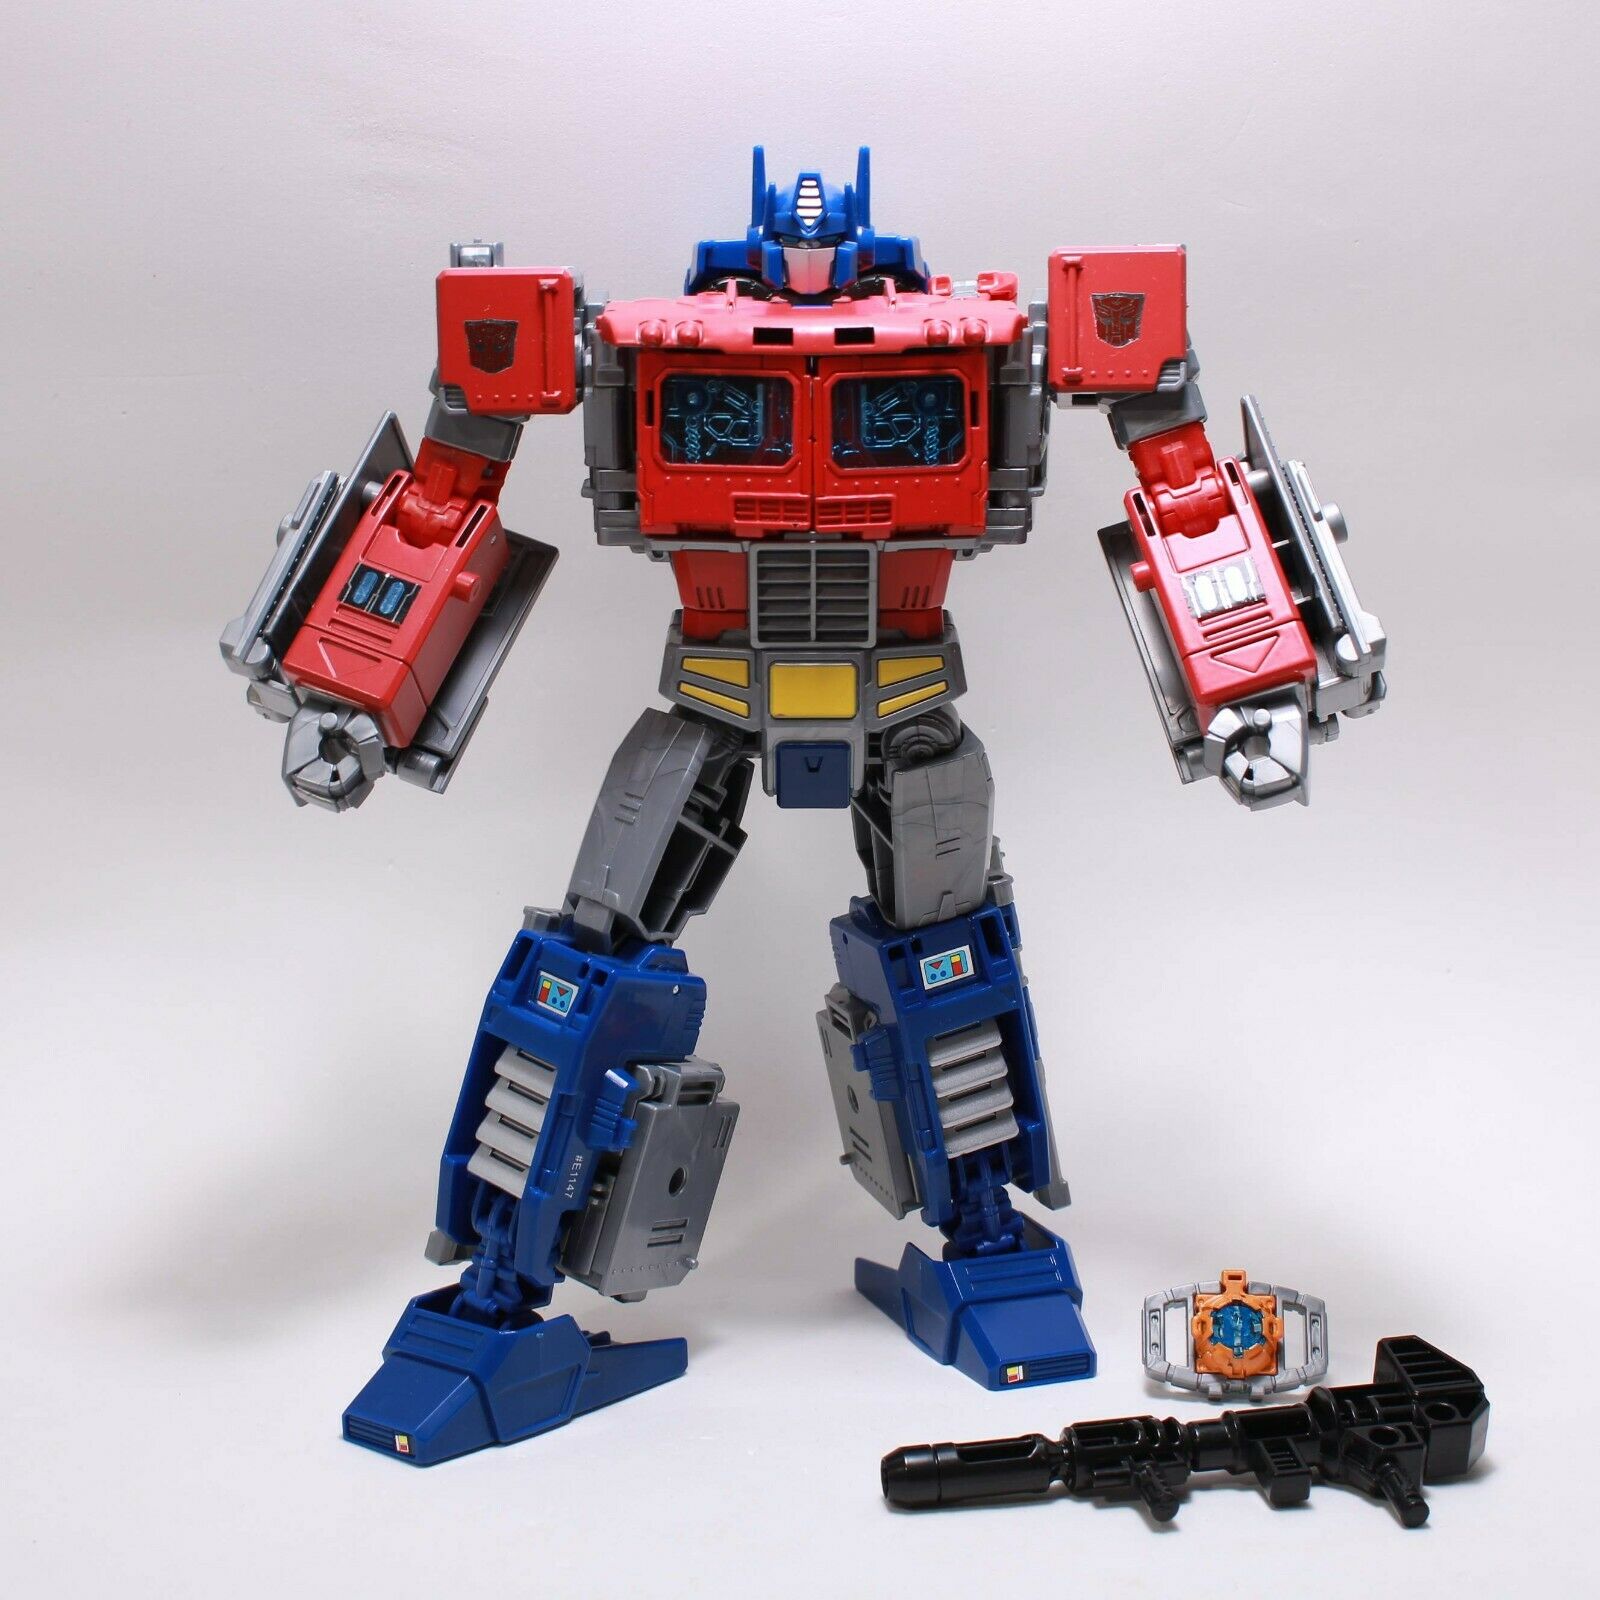 Transformers Power of The Primes Optimus Prime - Leader Class Figure Complete